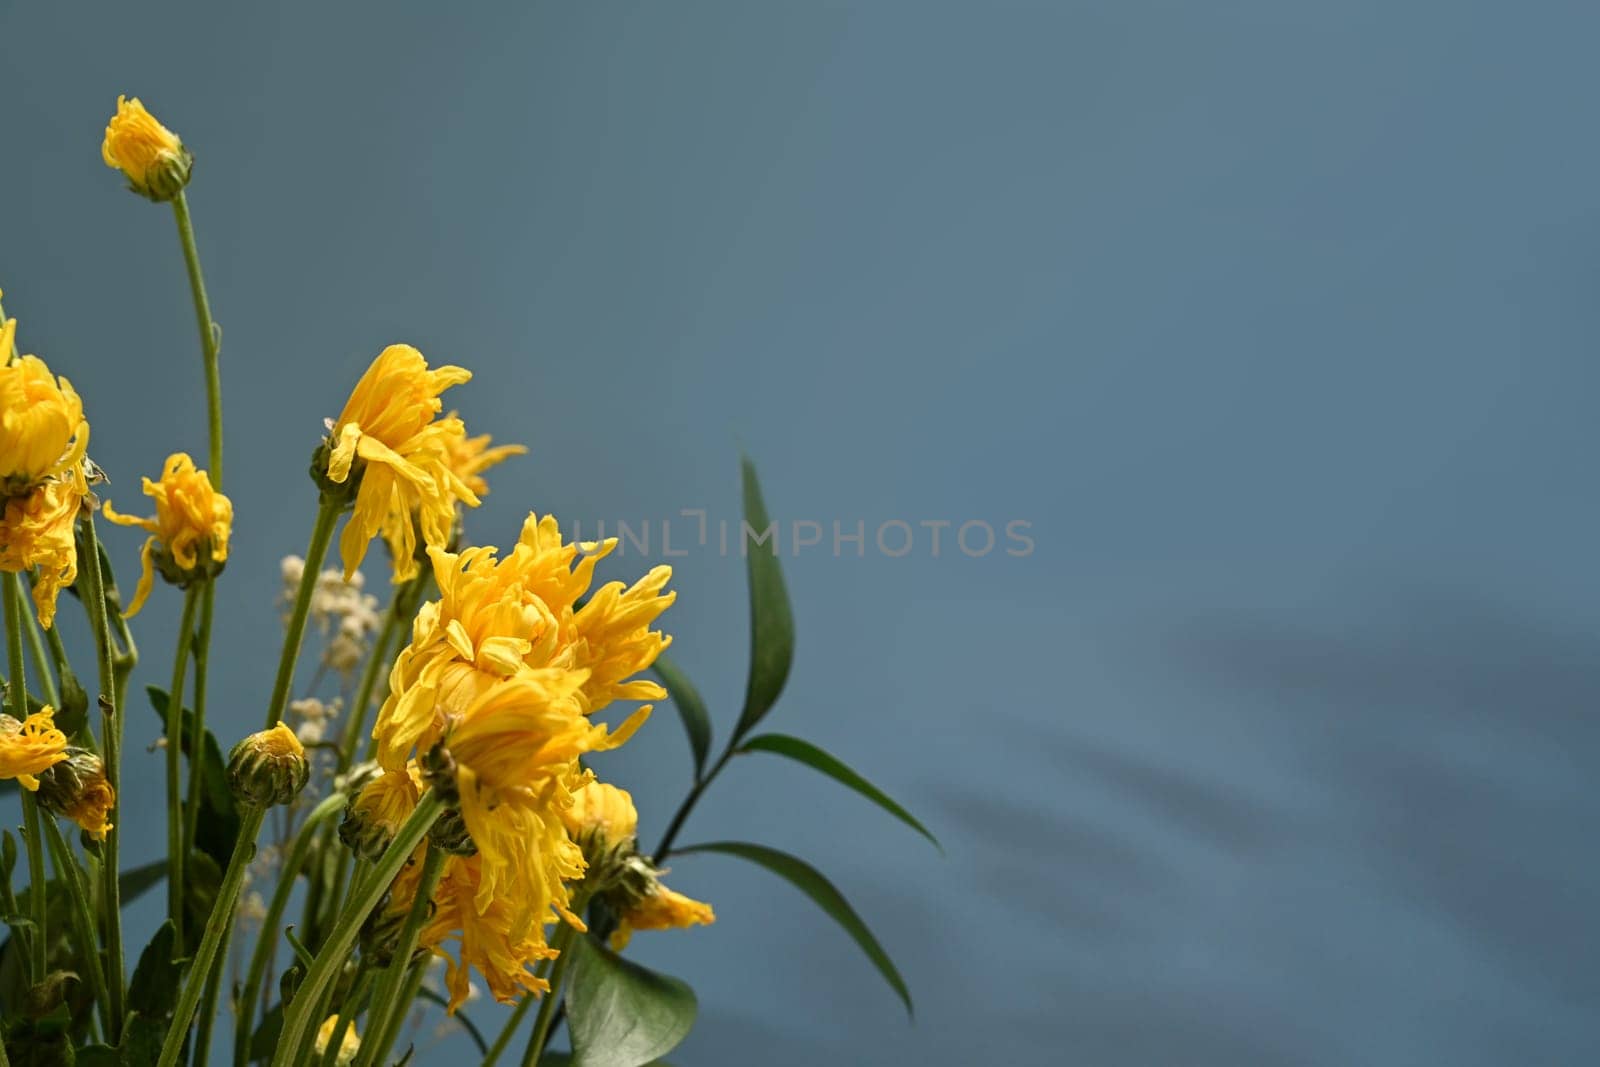 Wilted marigold flowers on blue background with copy space for your text by prathanchorruangsak